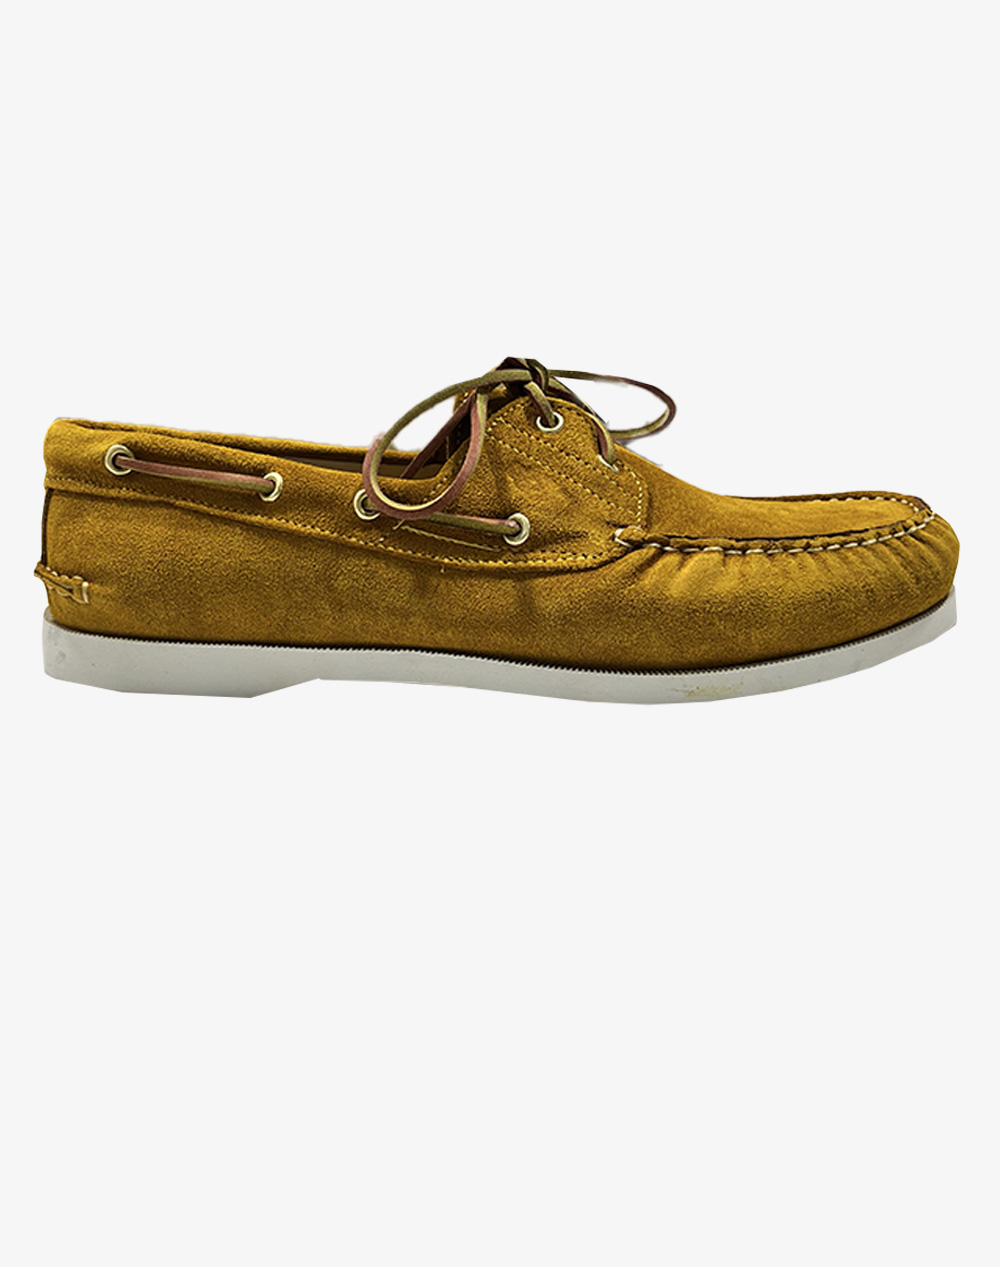 CHICAGO SHOES 124-5.0947-820-GOLD SUEDE Mustard 3820PCHIC6010011_XR31627